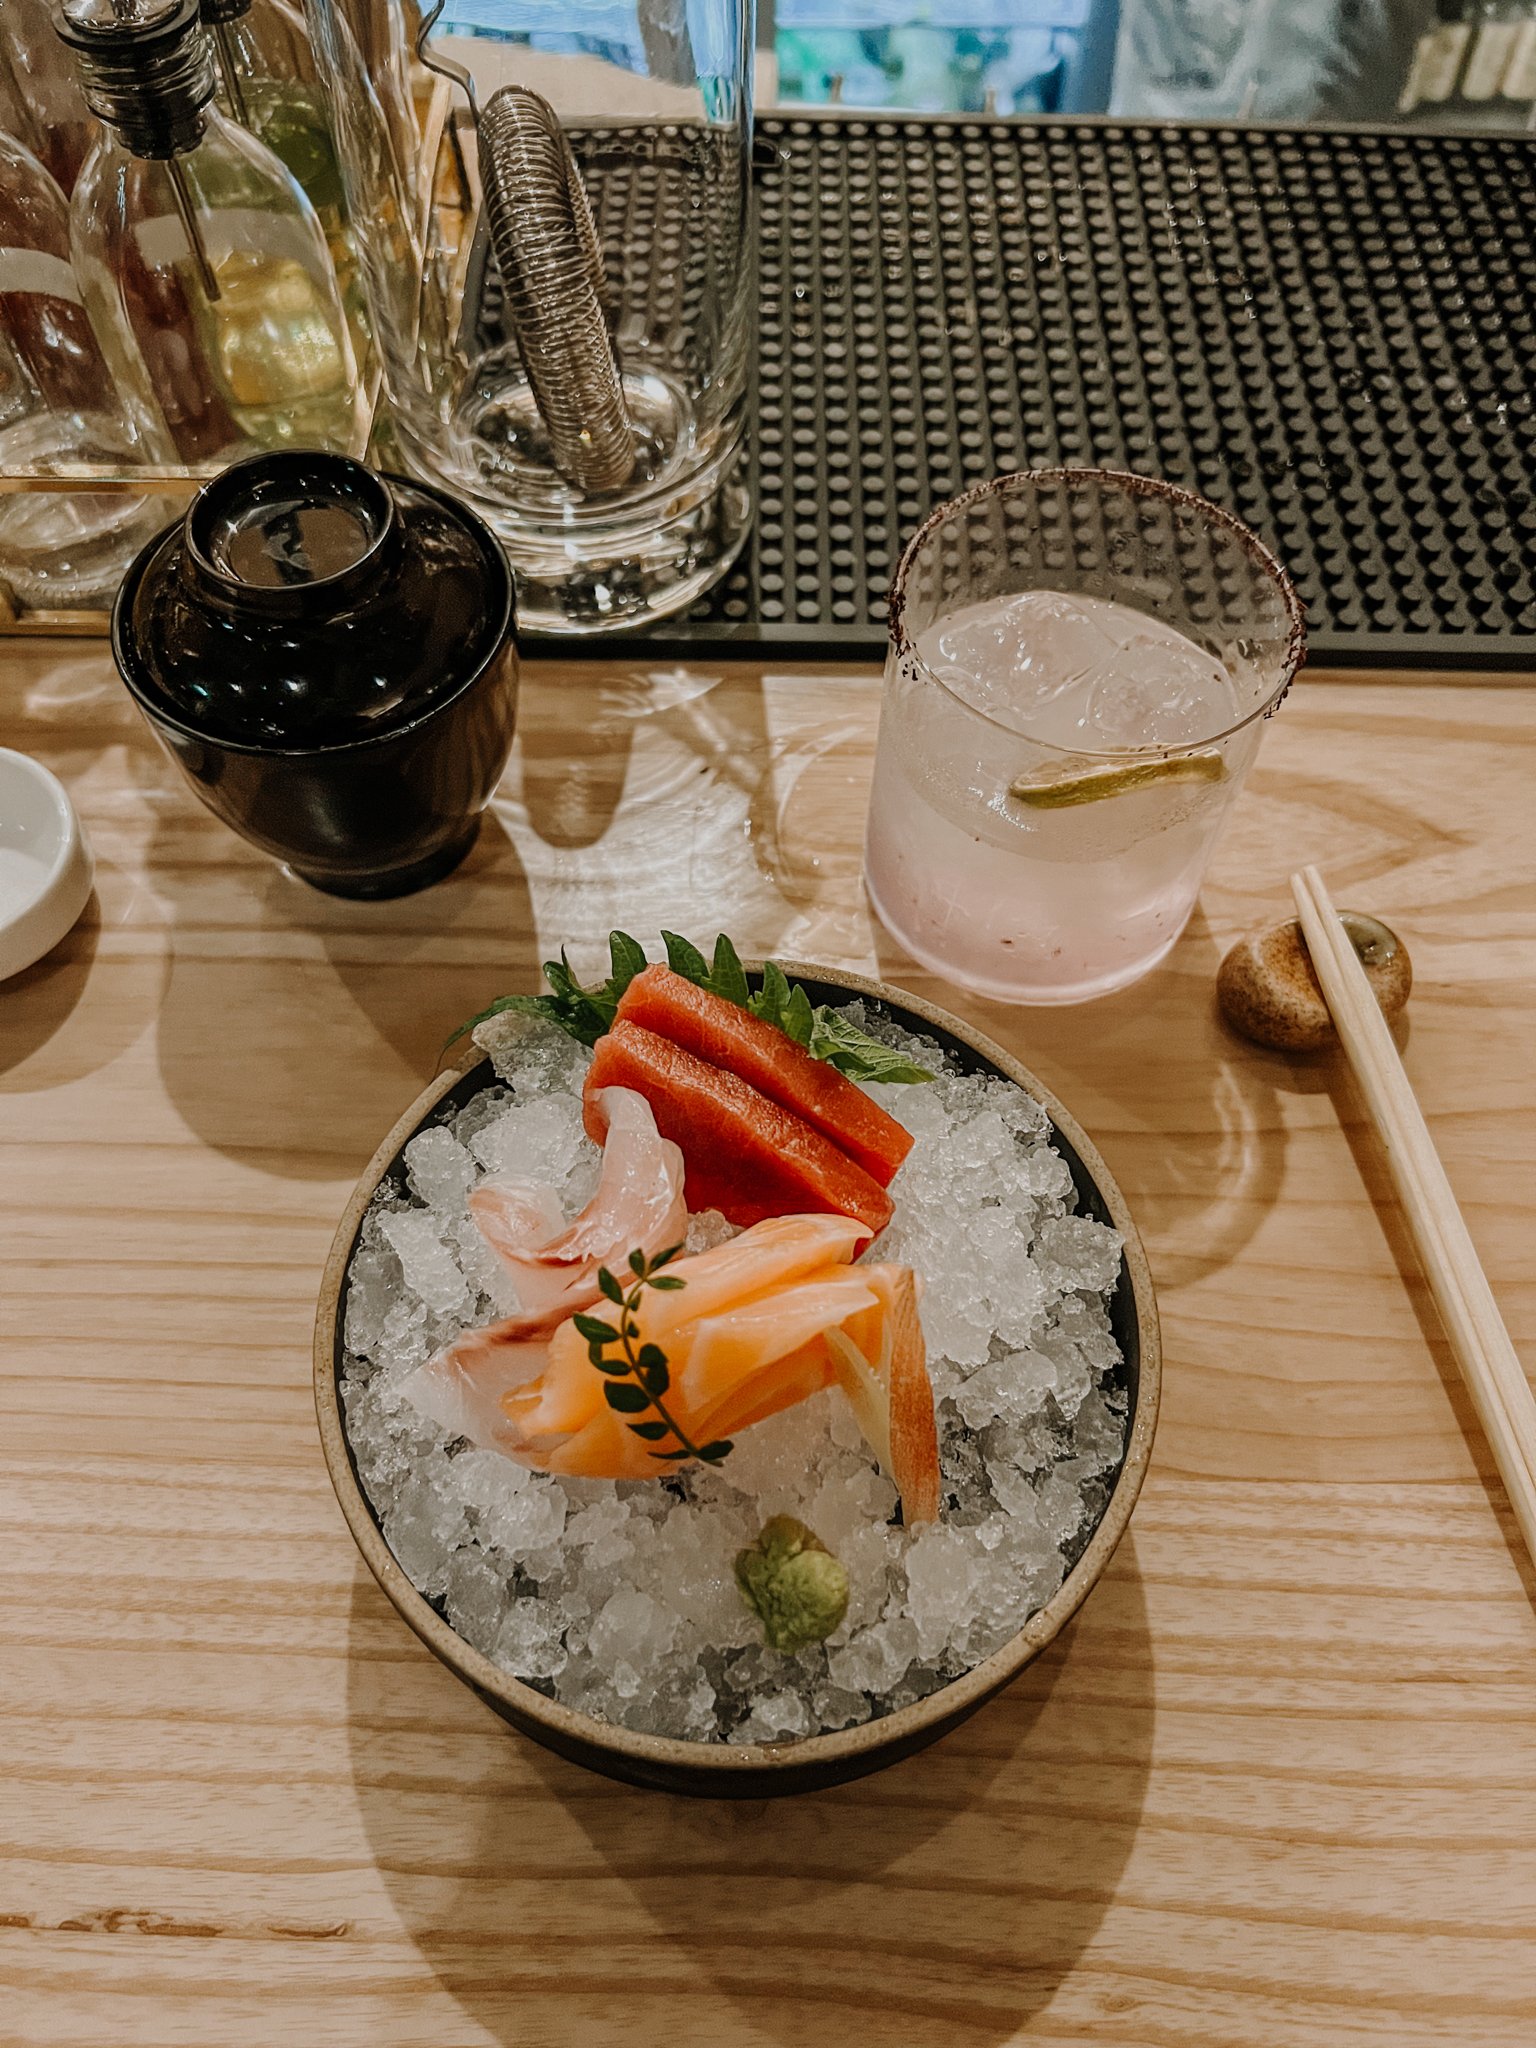 Sumi, a delicious sushi restaurant in Notting Hill